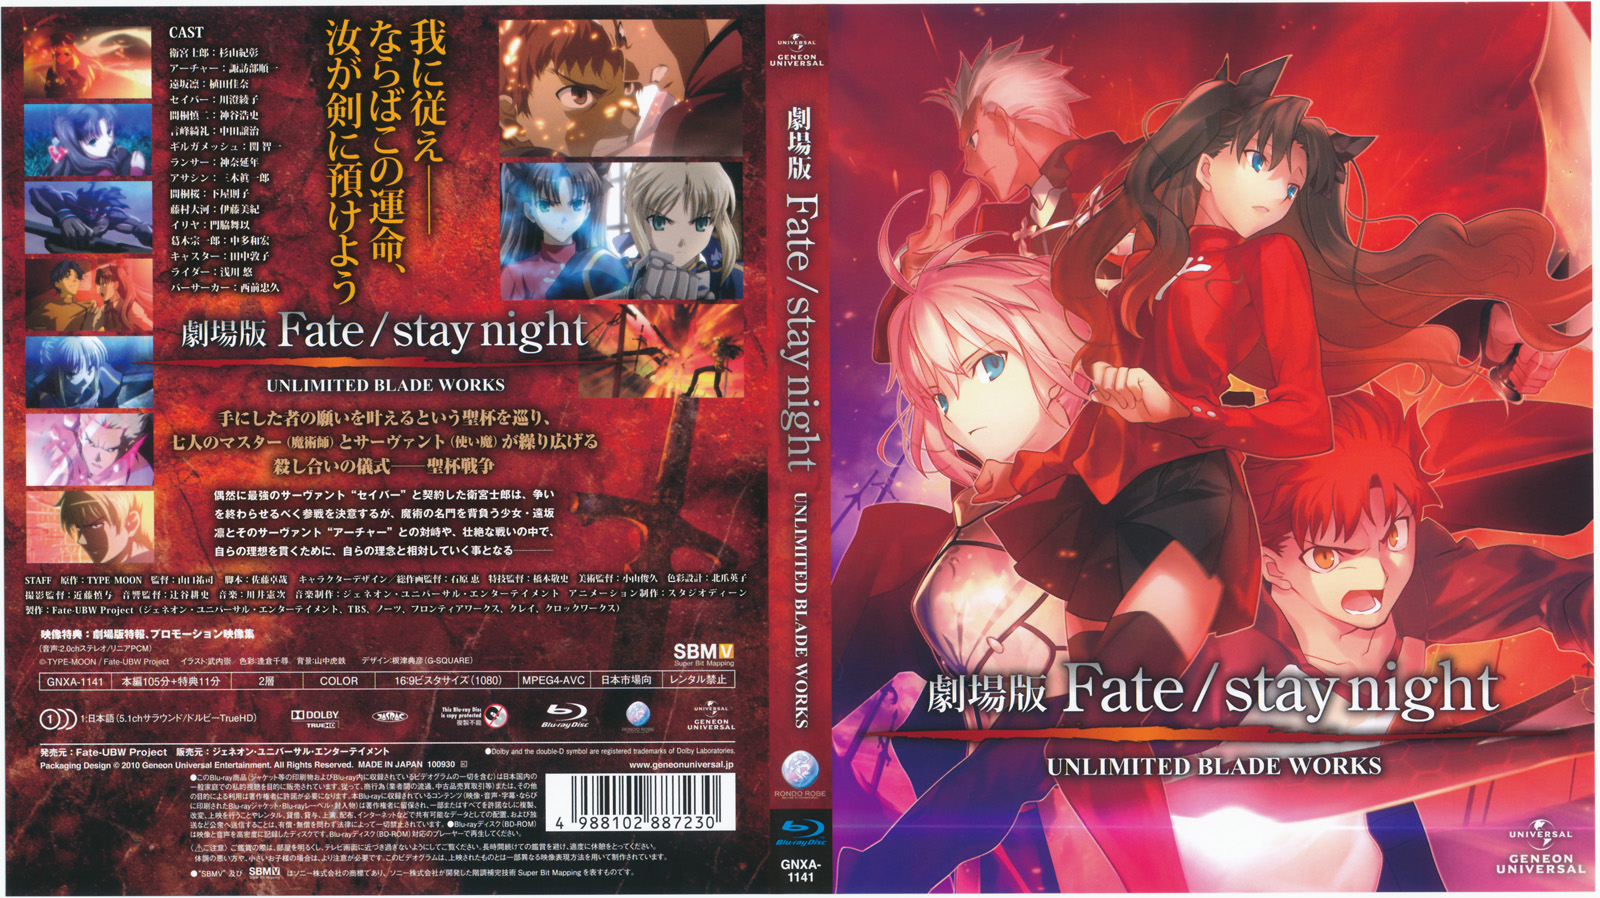 Fate/stay night Unlimited Blade Works Film | Tsuki-kan